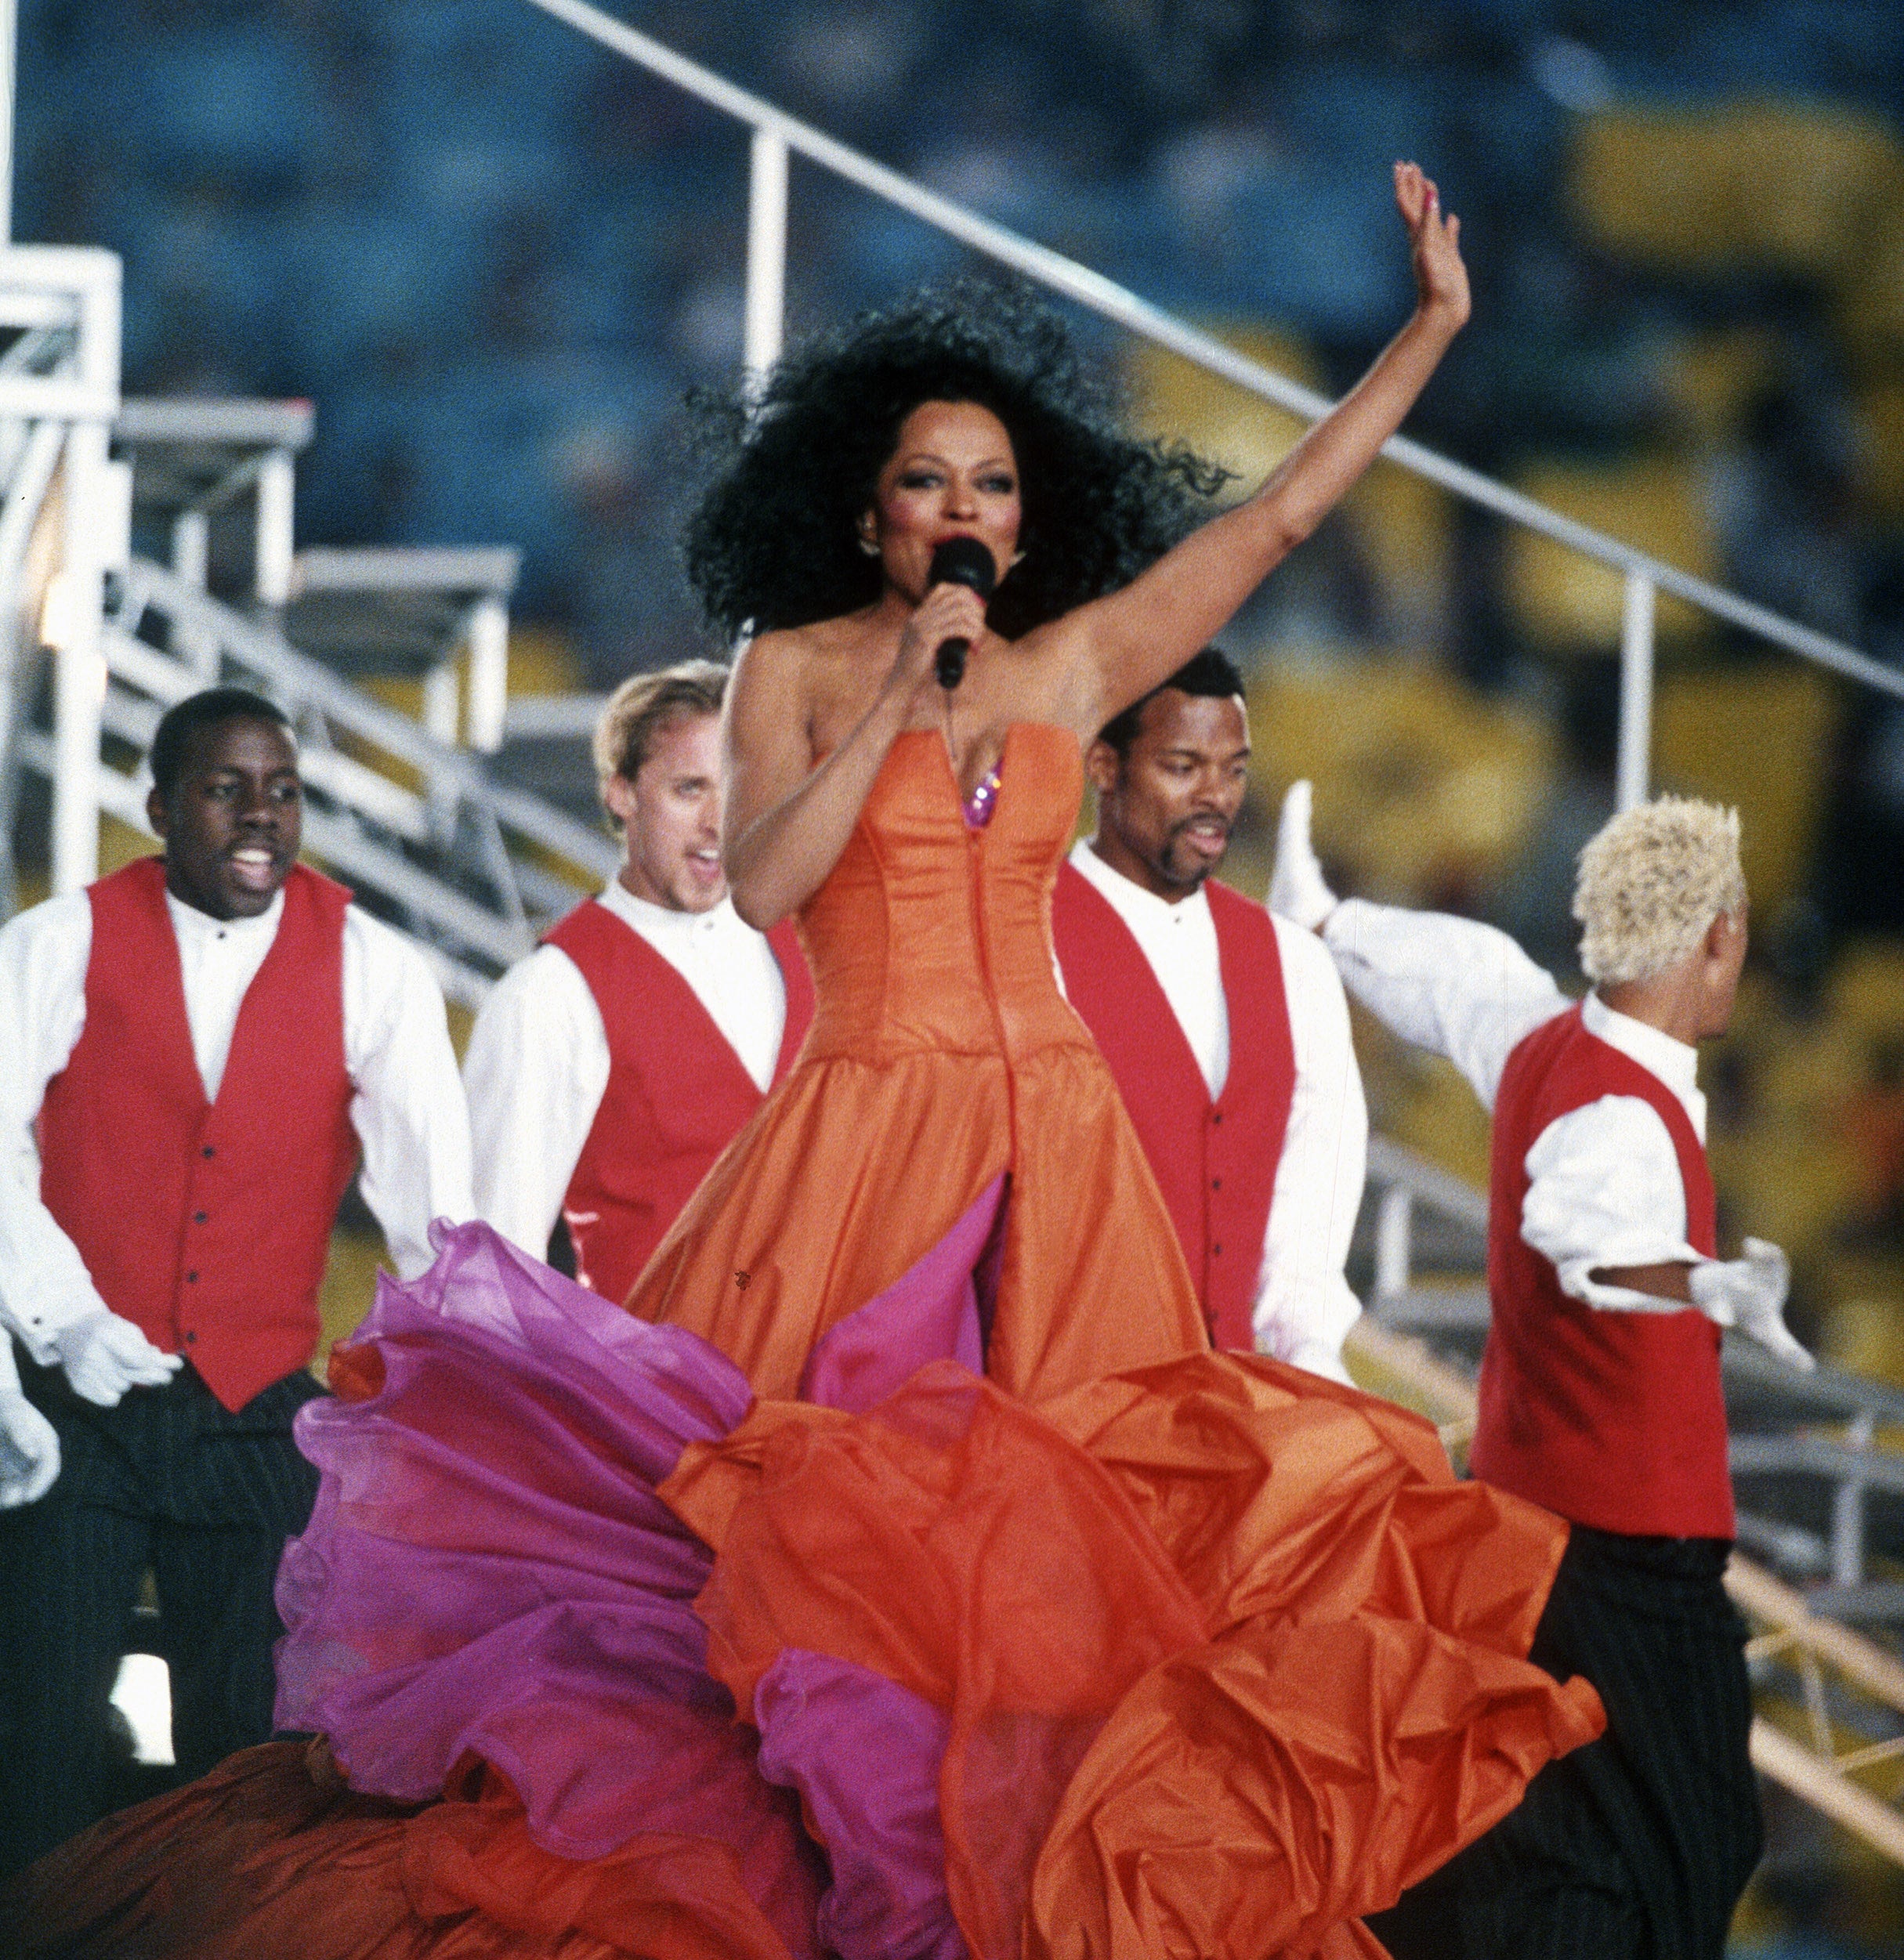 Diana Ross preforms during haft time of Super Bowl XXX between the Dallas Cowboys and Pittsburgh Steelers on January 28, 1996 at Sun Devil Stadium in Tempe, Arizona